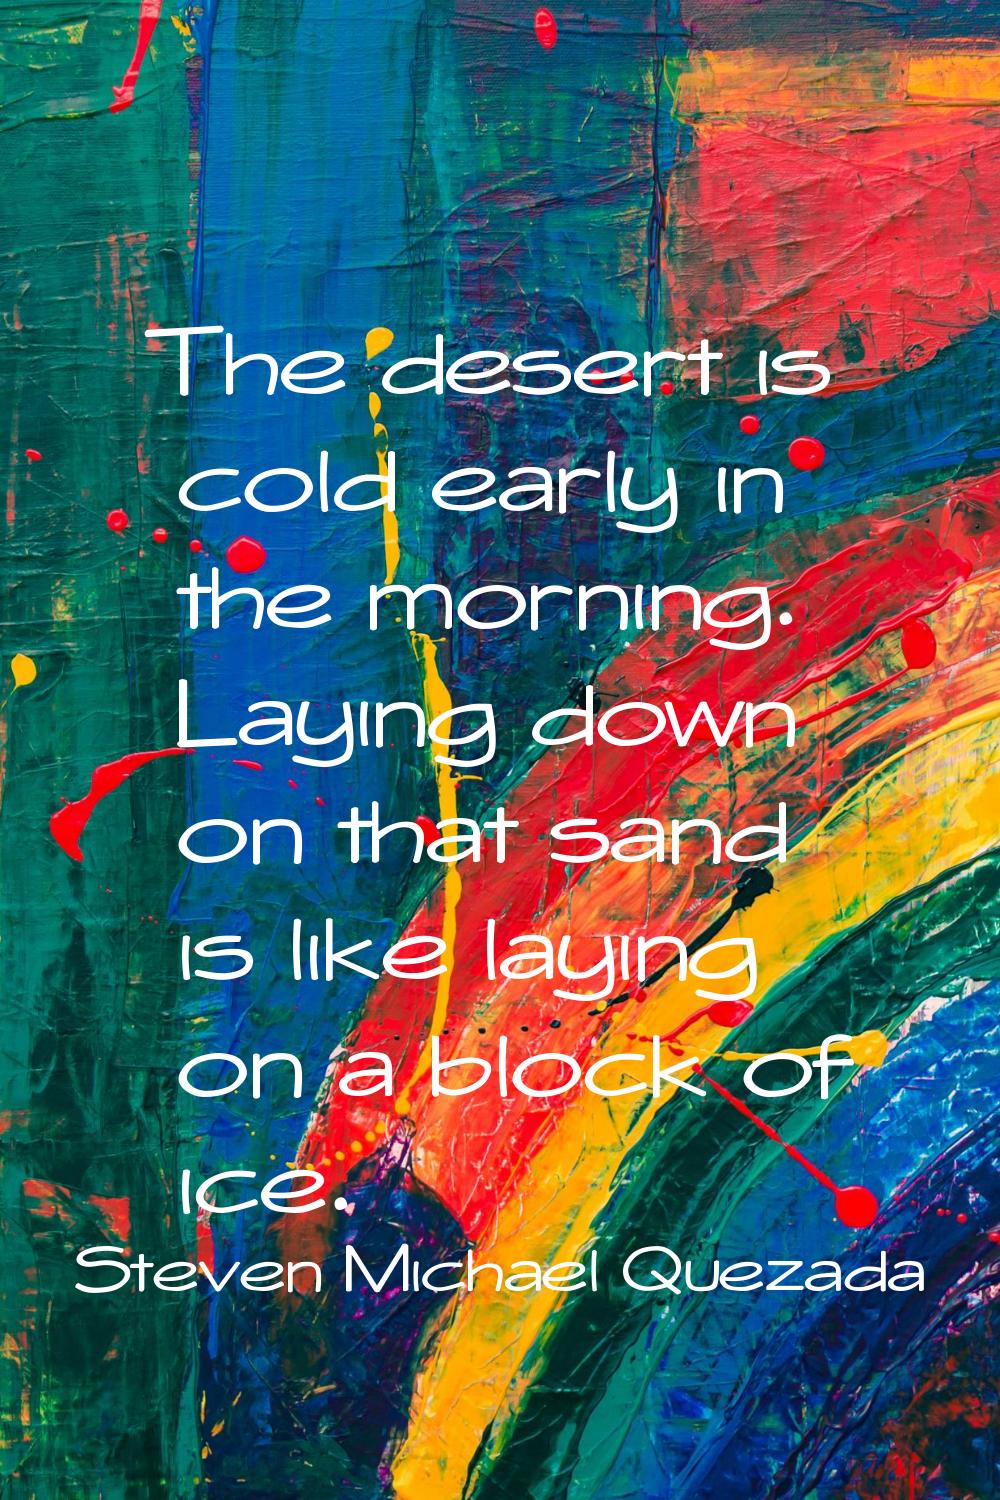 The desert is cold early in the morning. Laying down on that sand is like laying on a block of ice.